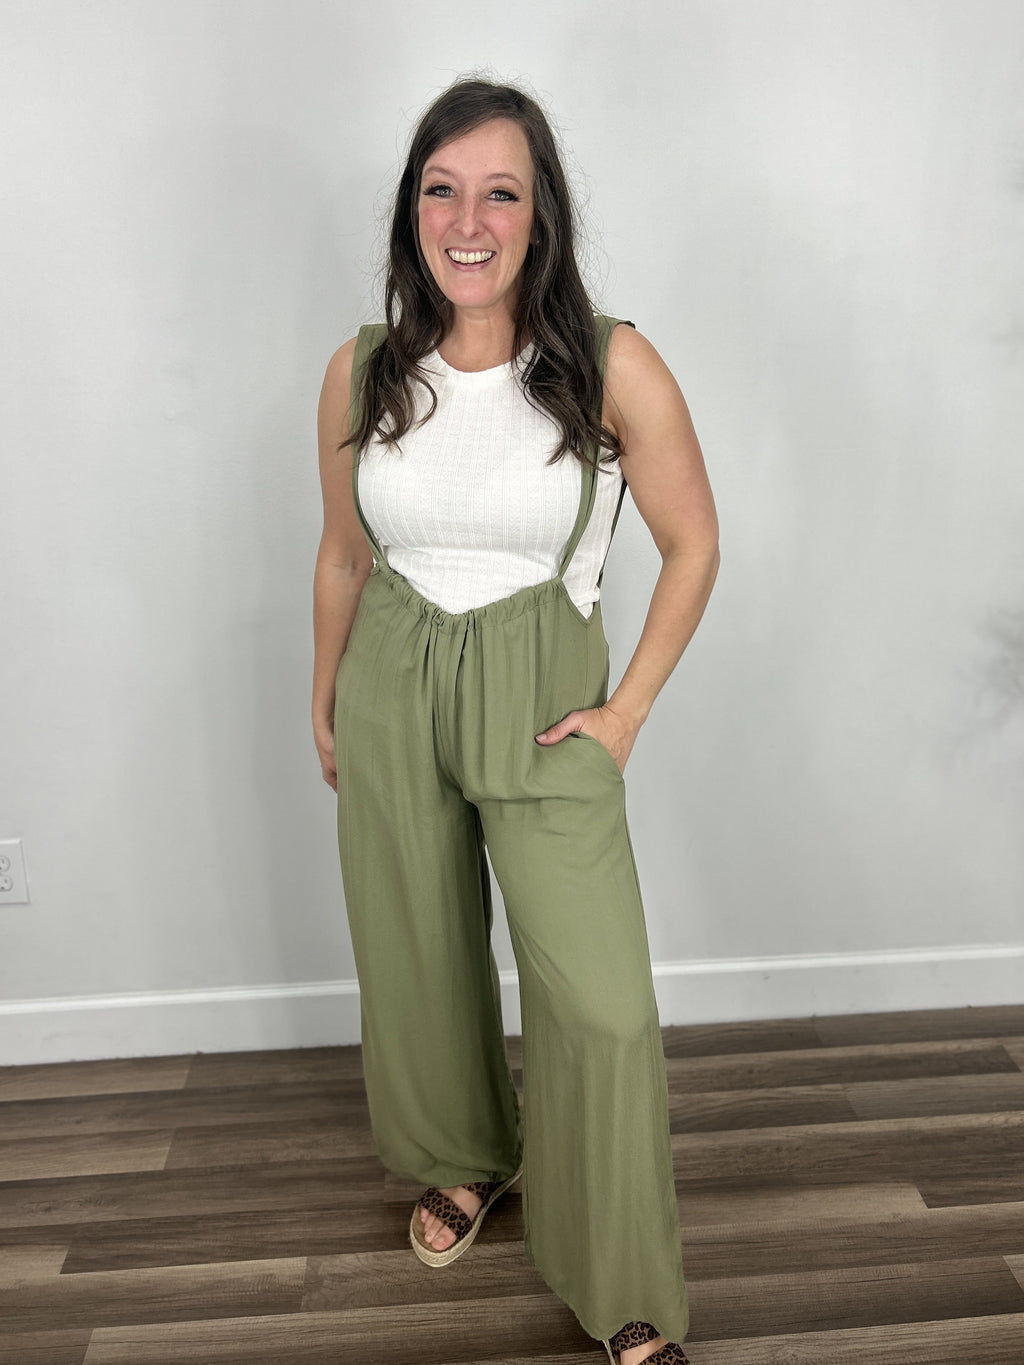 Carrigan casual wide leg jumpsuit paired with cream tank and sandals.